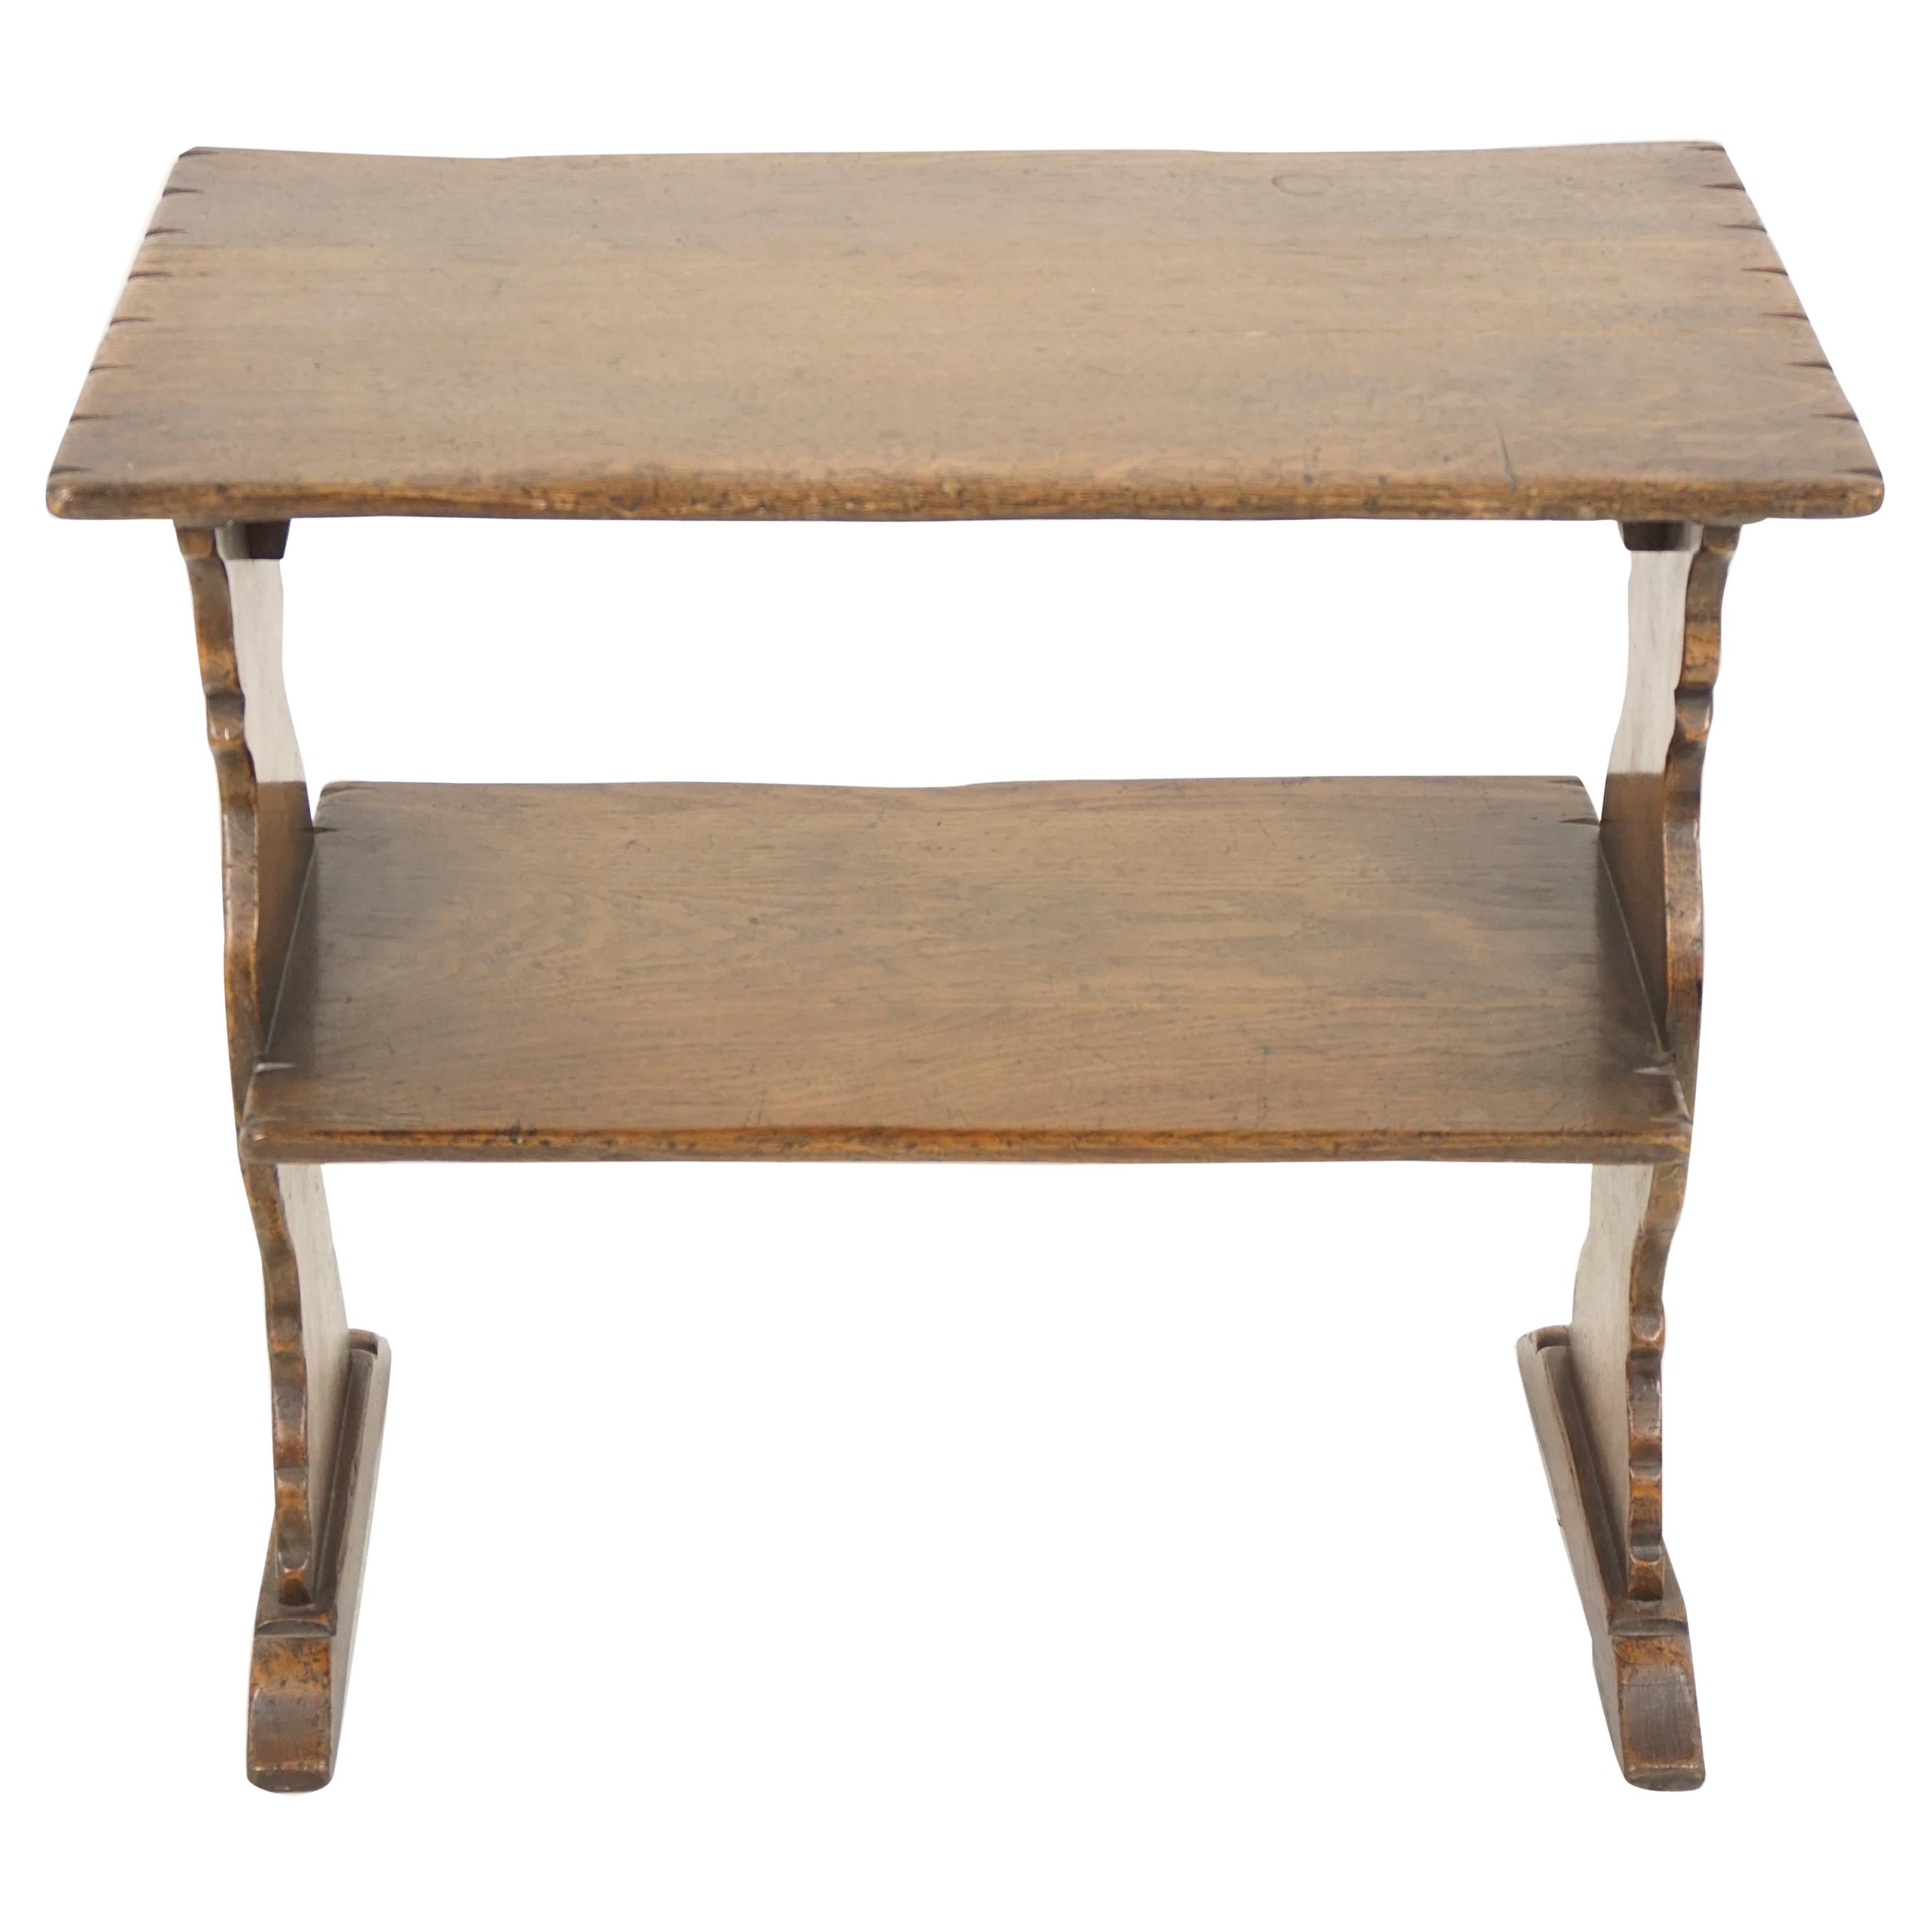 Vintage Oak Table, Two Tiered Bookstand, Antique Furniture, Scotland 1930, B1479